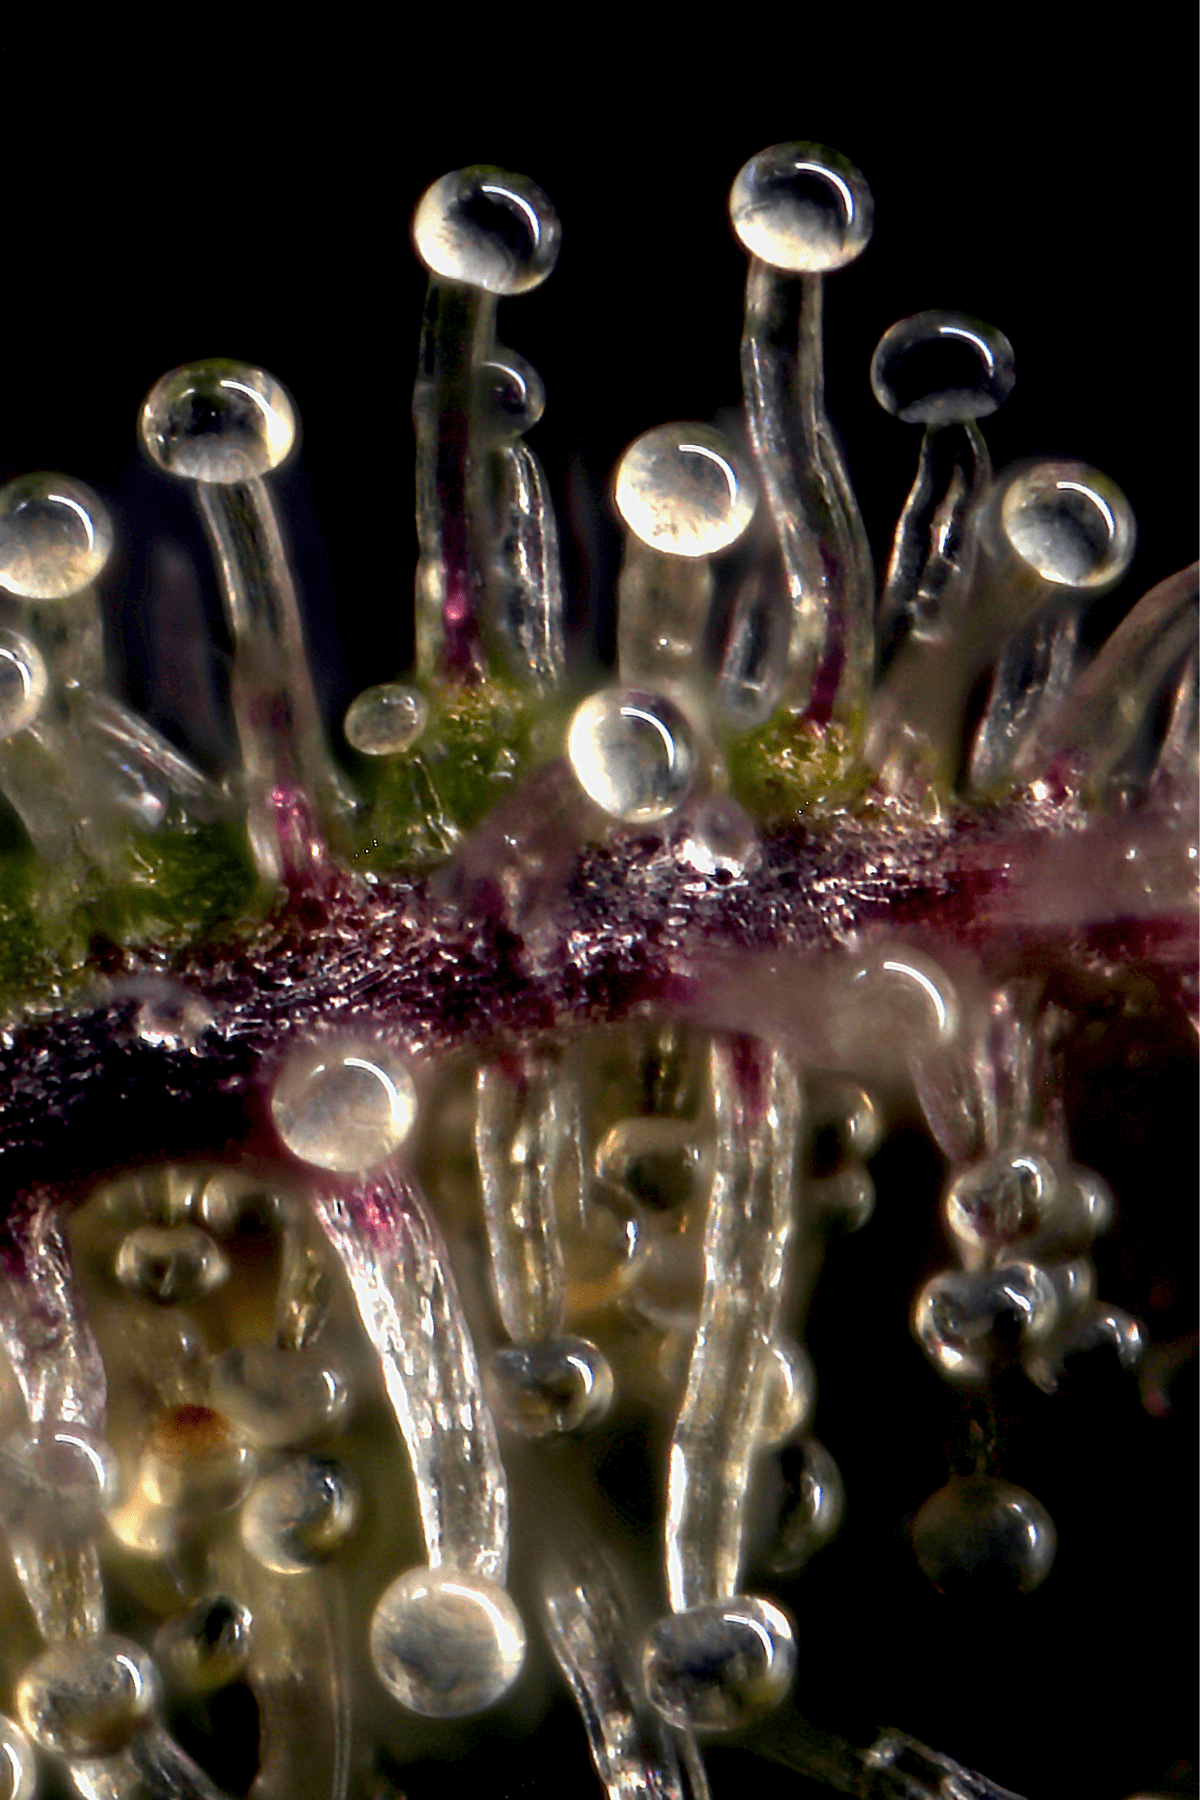 An upclose picture of cannabis trichomes